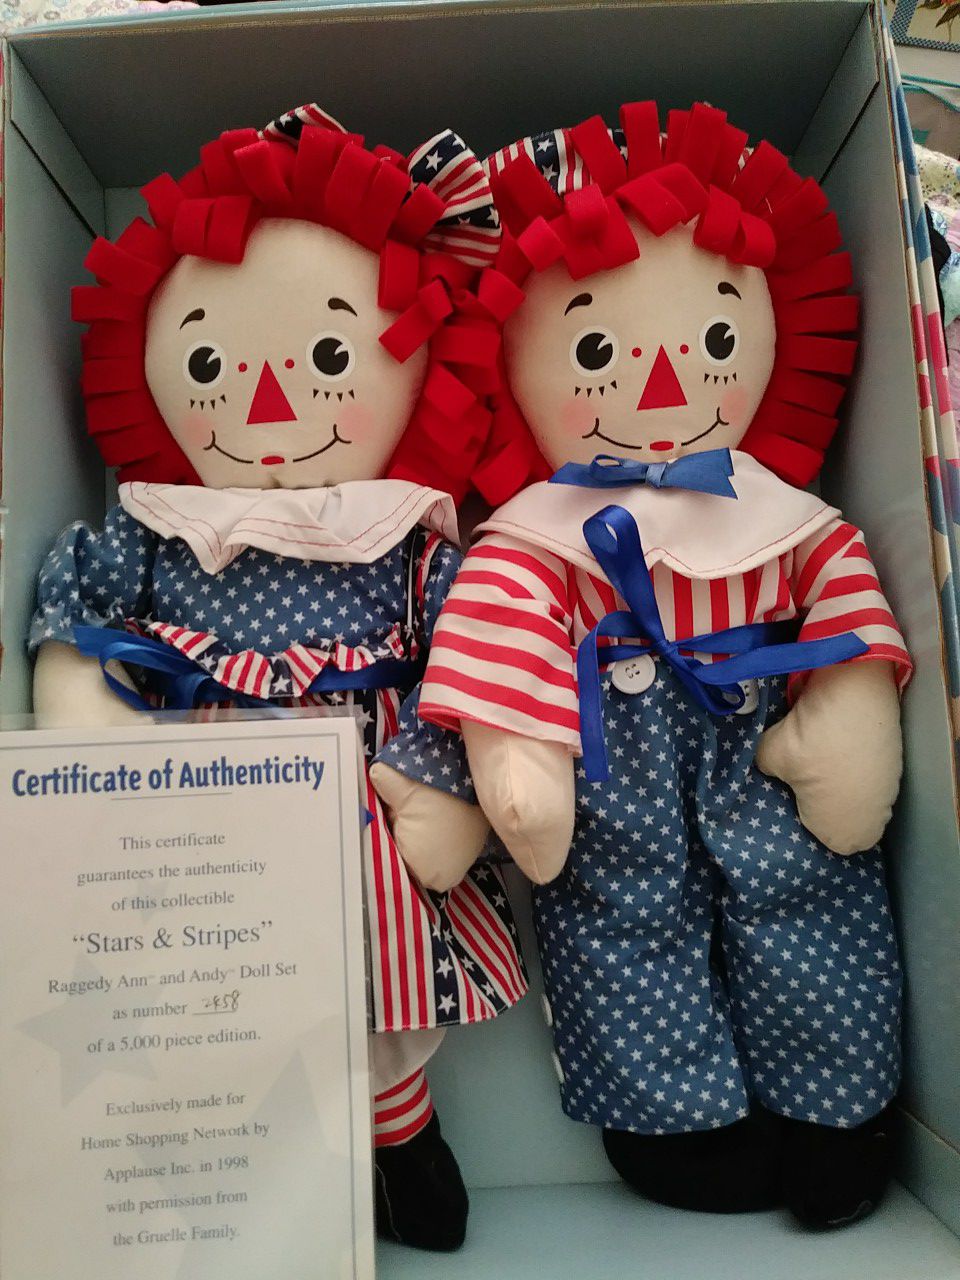 Stars & Stripes Raggedy Ann and Andy set new!